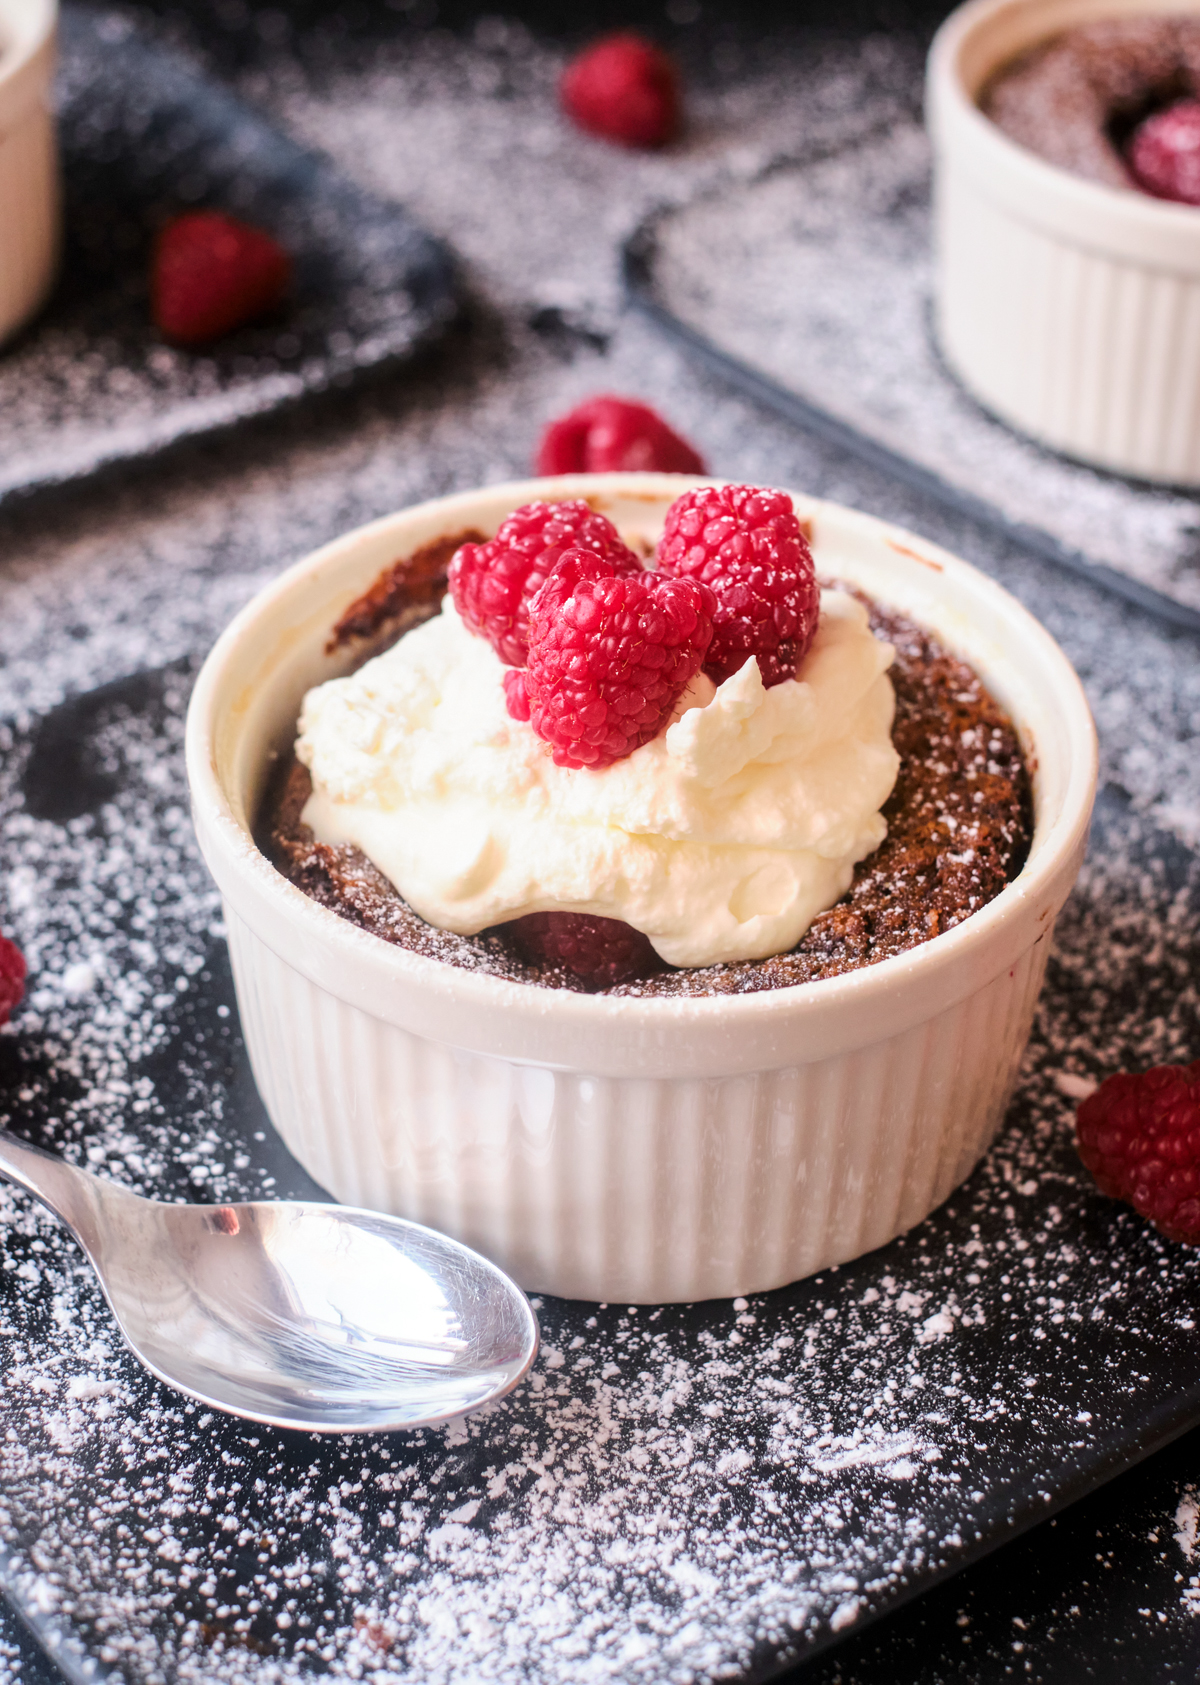 chocolate self saucing pudding recipe in a ramekin with raspberries and whipping cream on top